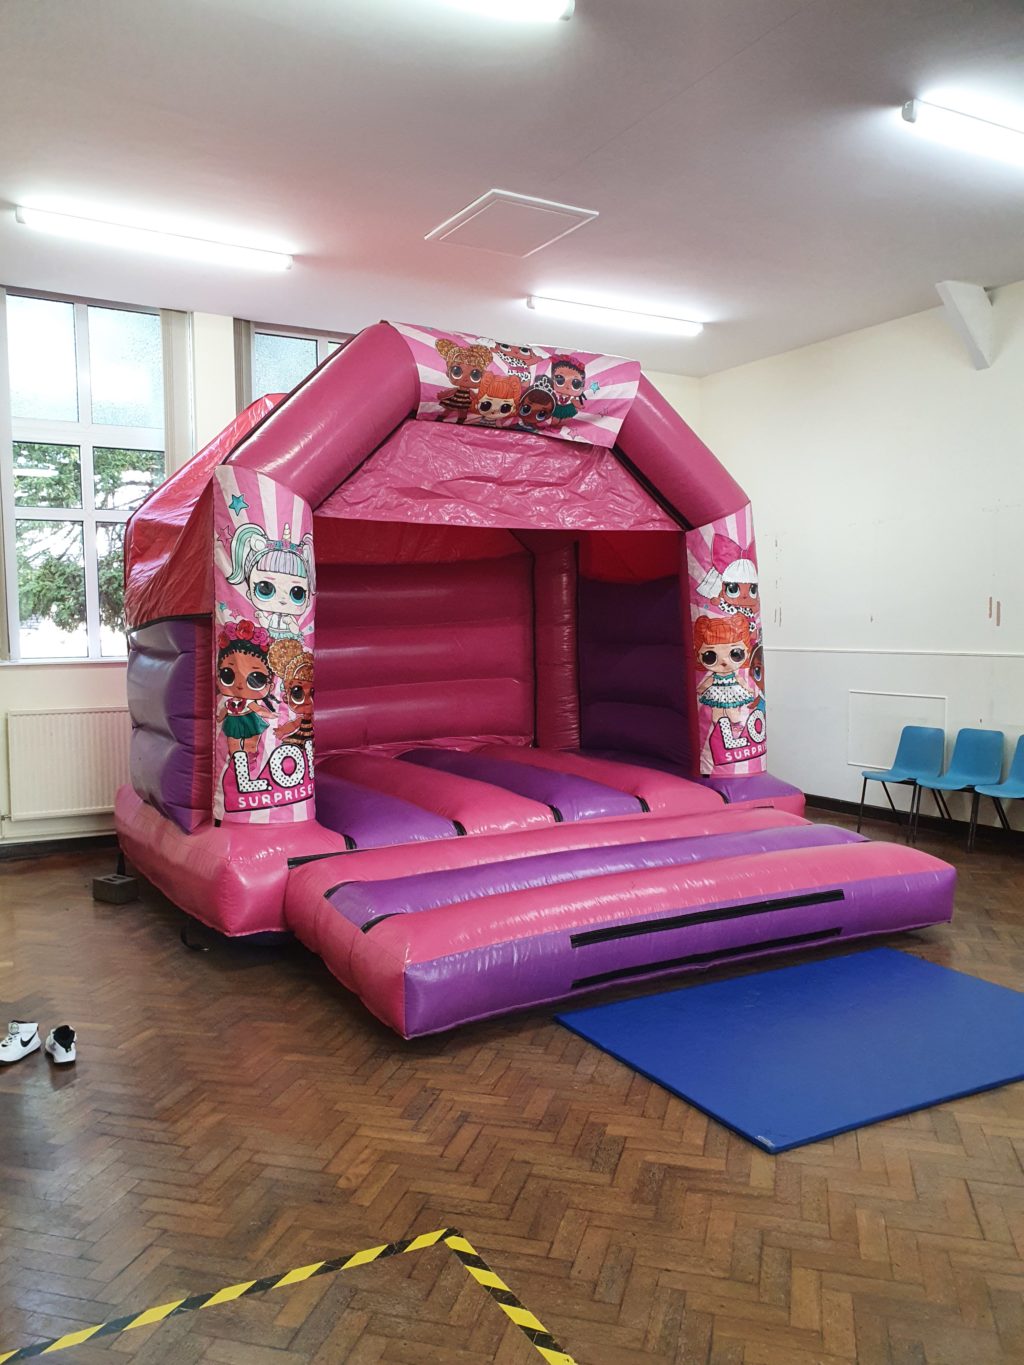 A pink bouncy castle in the village hall